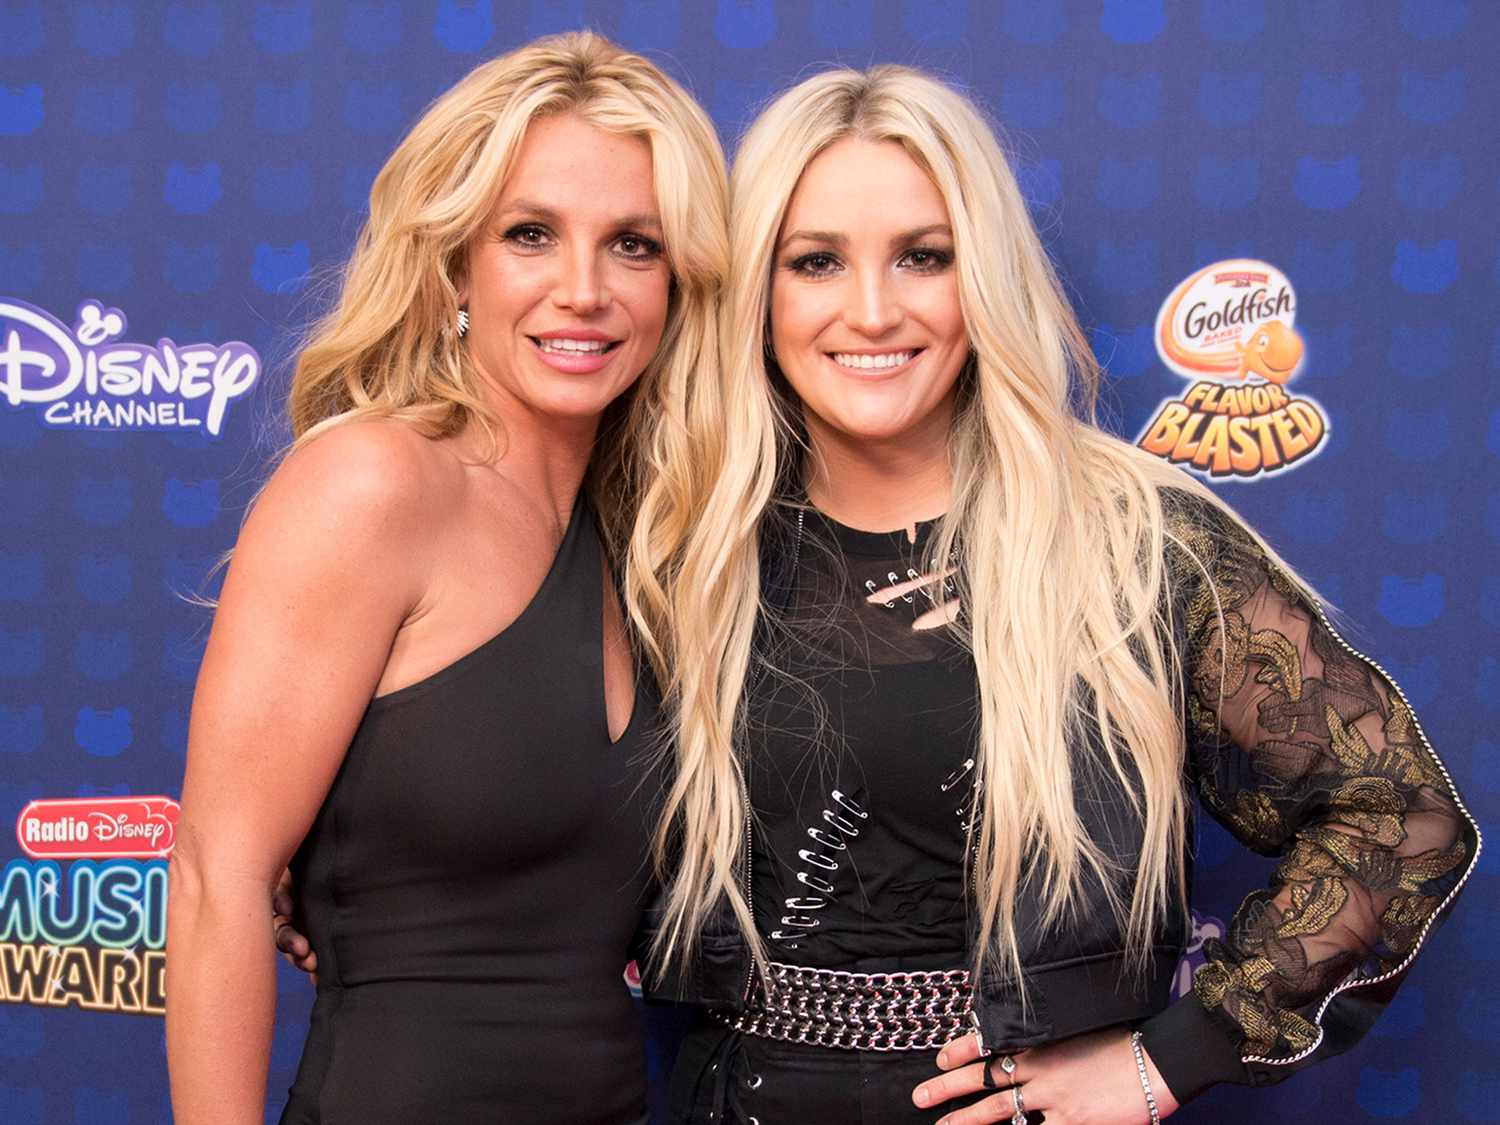 Image of Britney Spears and sister Jamie Lynn